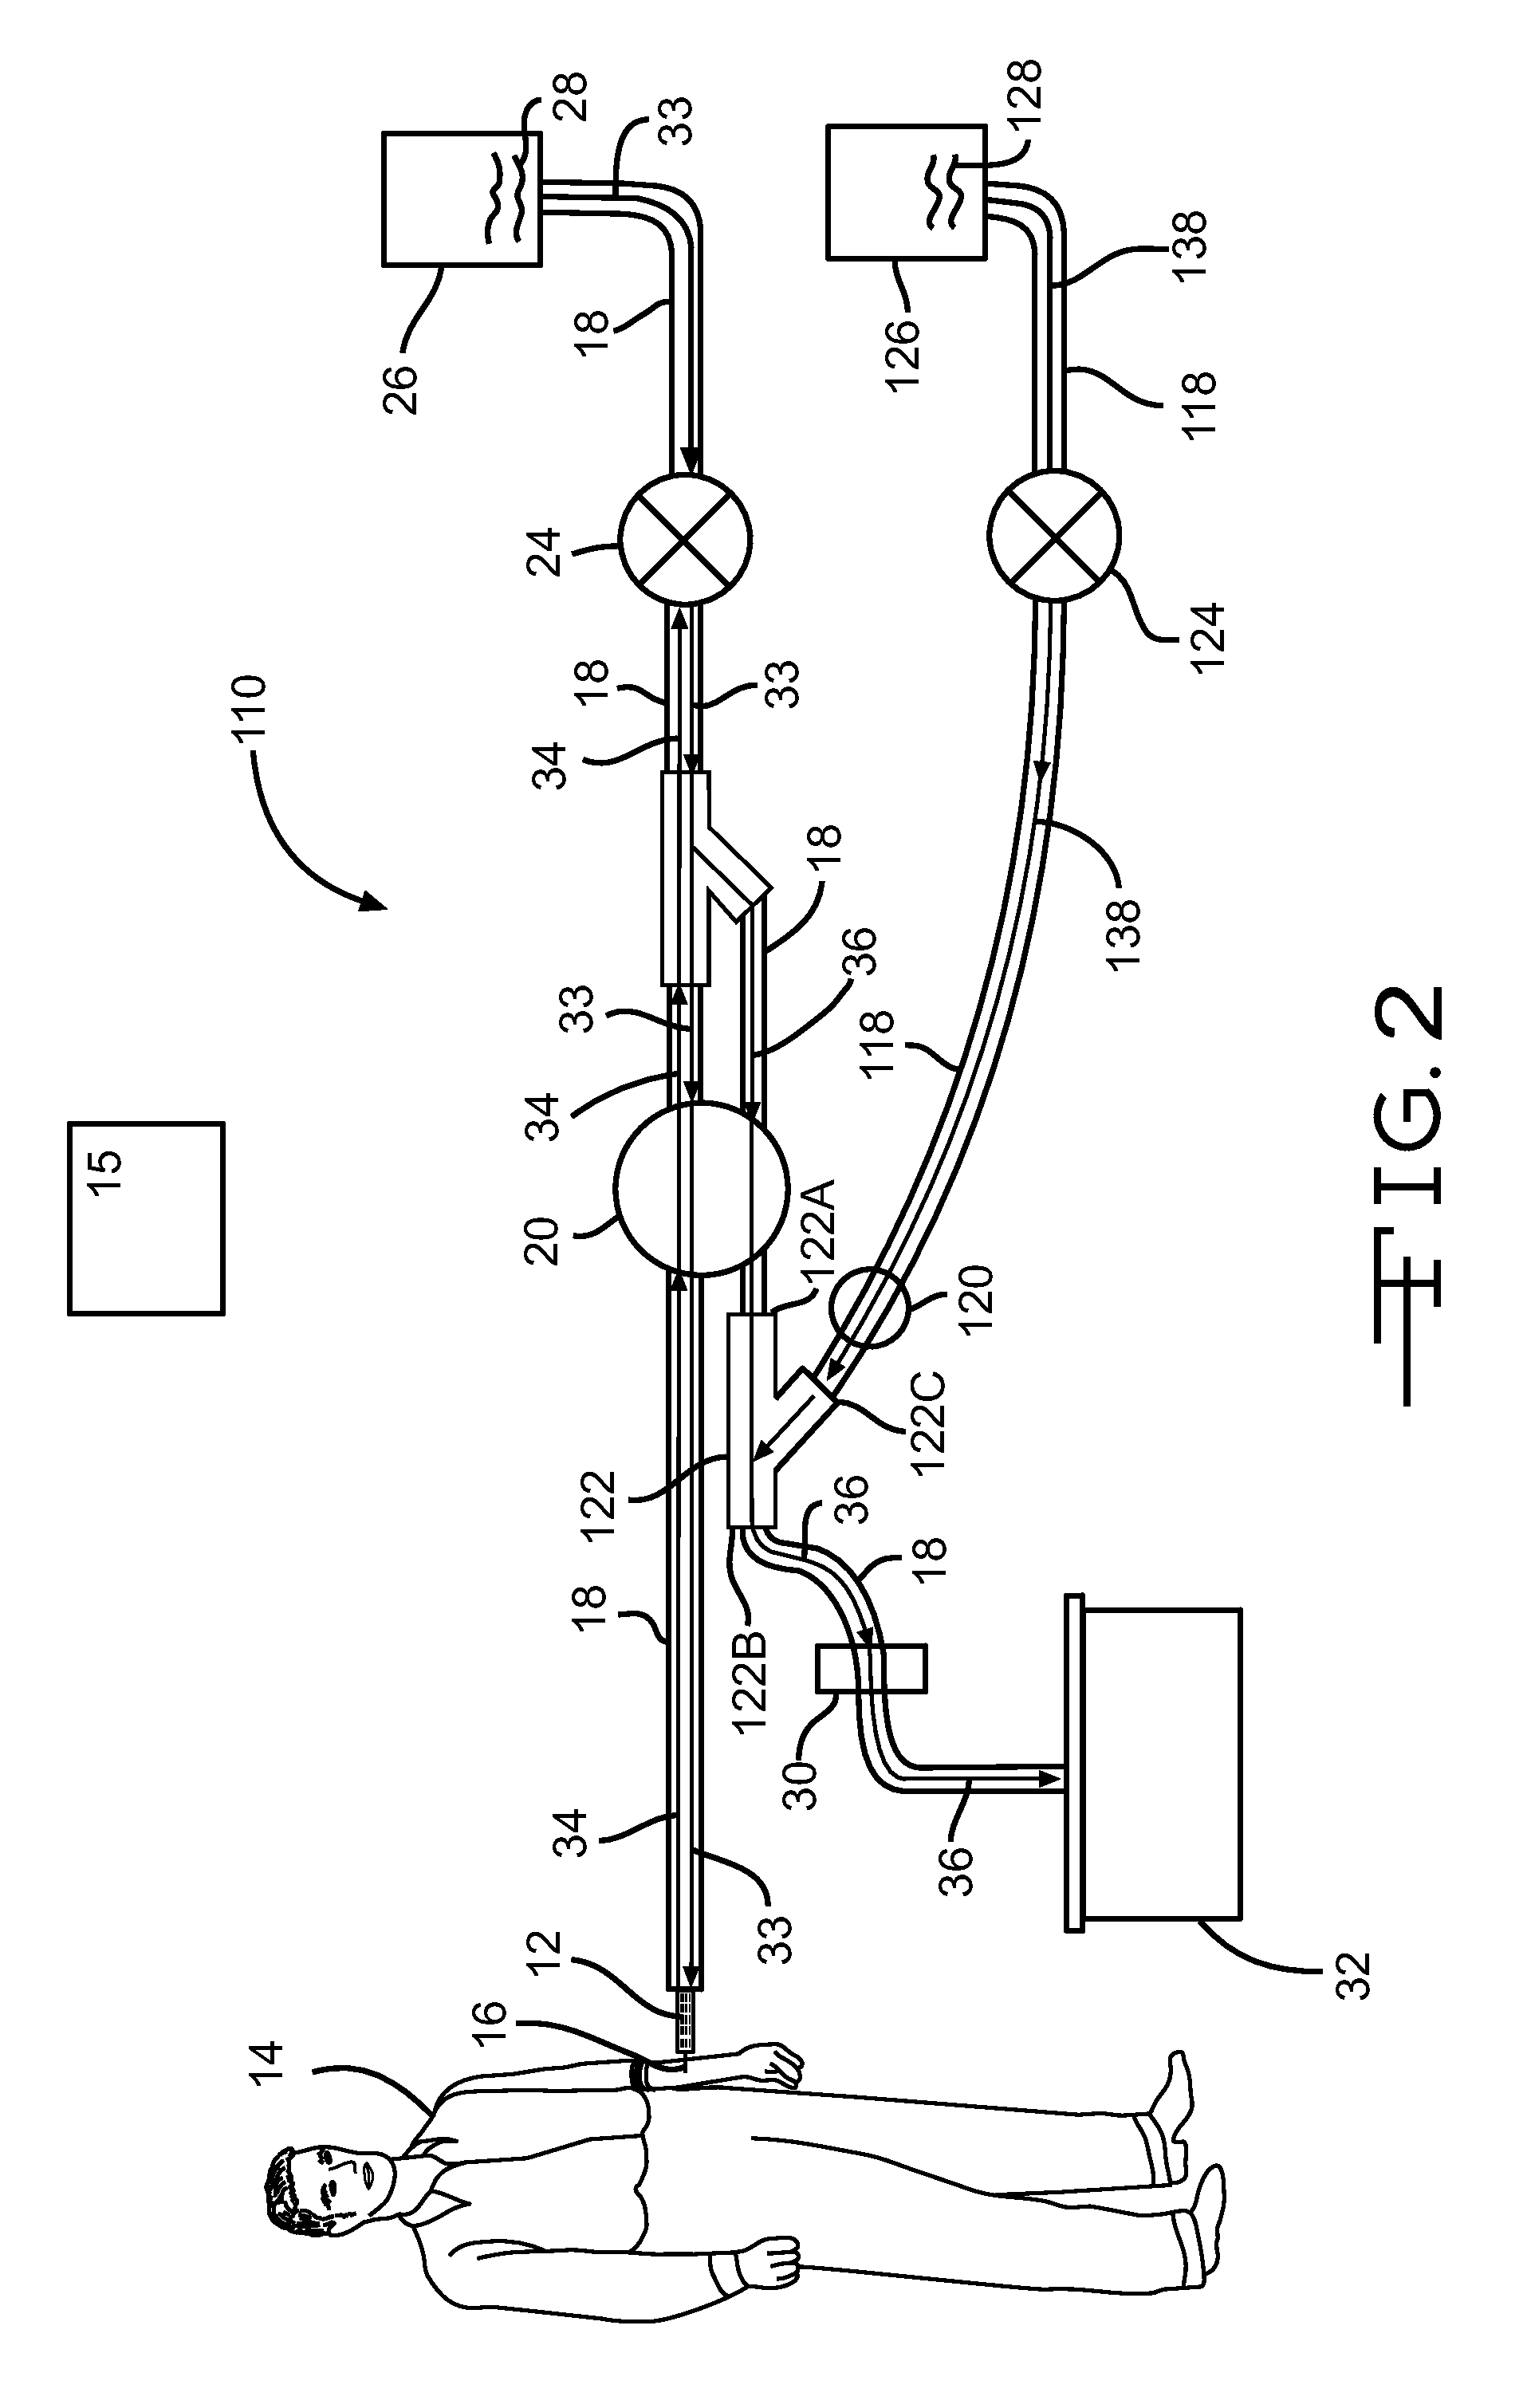 Automated blood sampling system and method